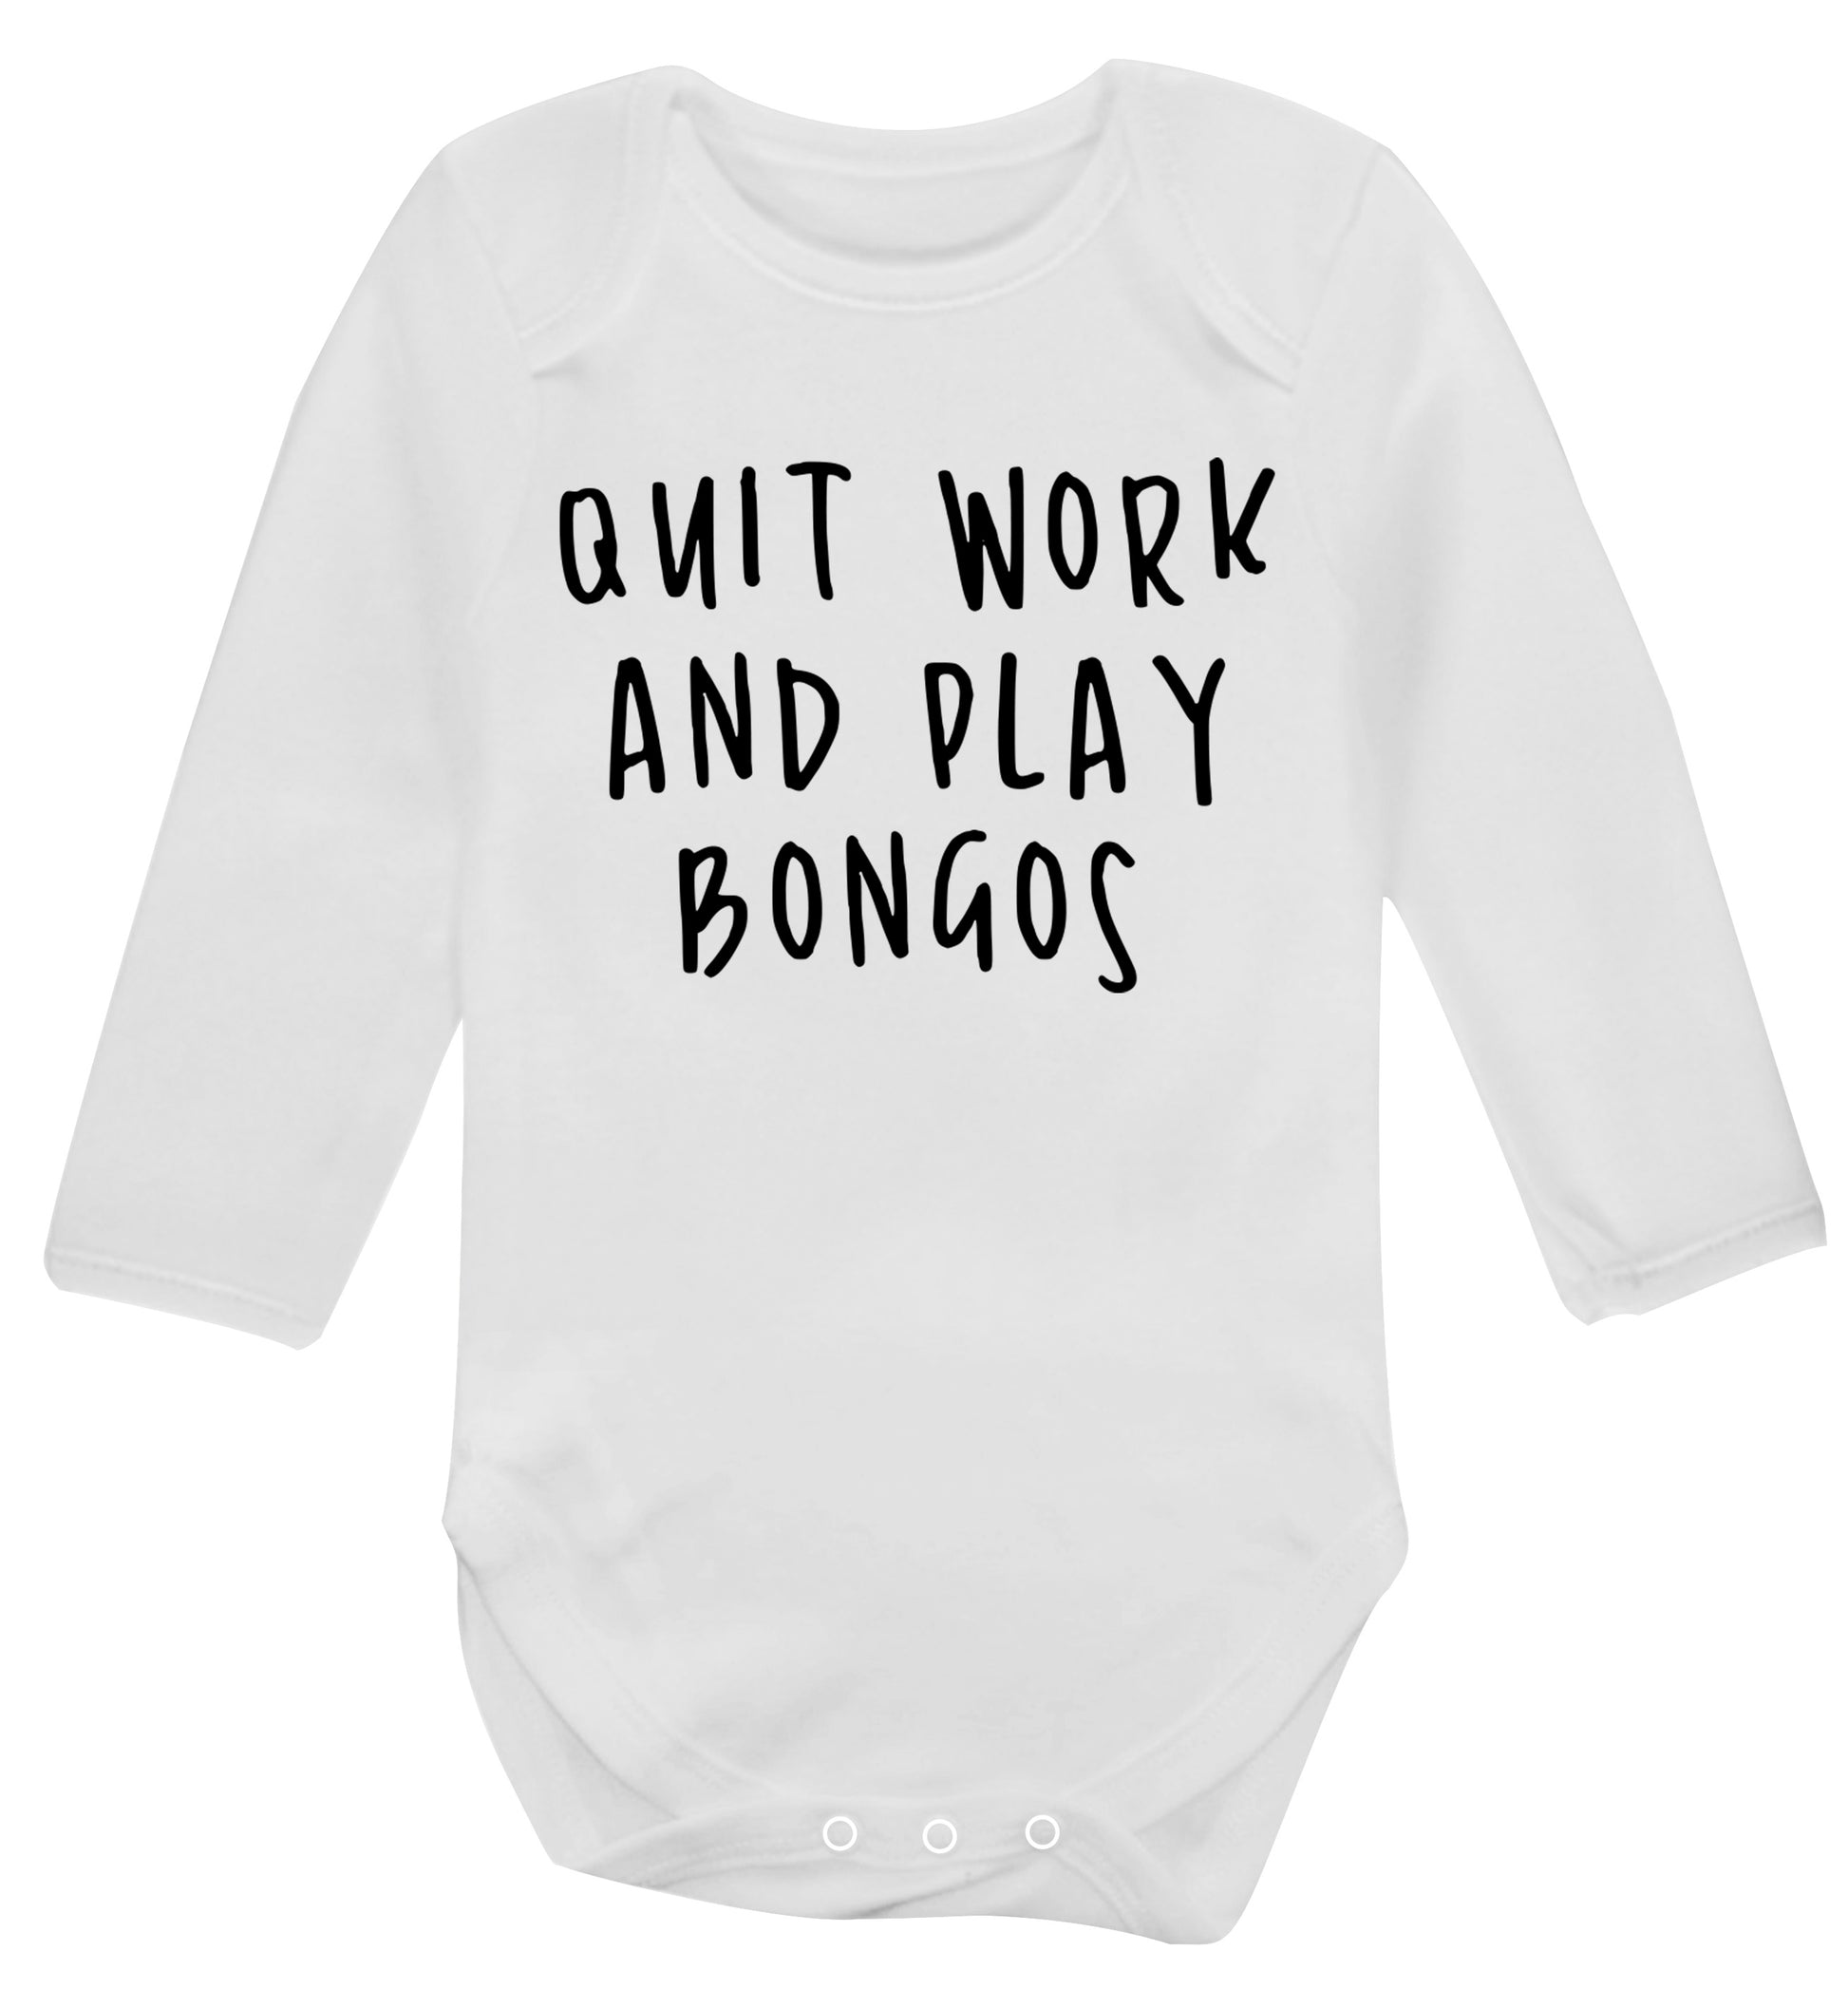 Quit work and play bongos Baby Vest long sleeved white 6-12 months